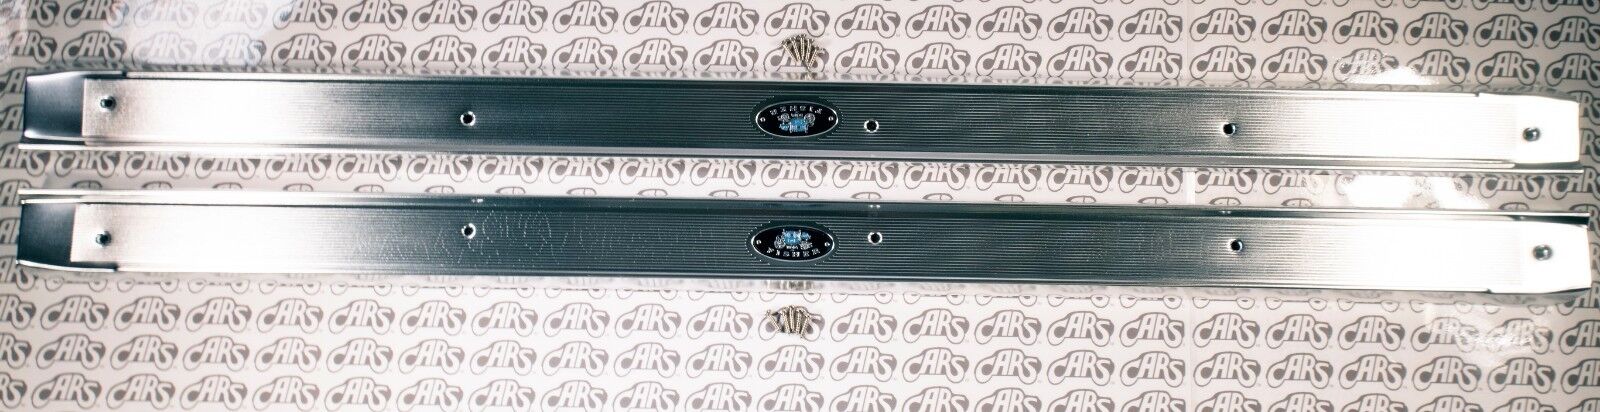 1961-1964 Chevrolet Bel-Air, Impala, Biscayne Door Sill Plates (2) Chevy